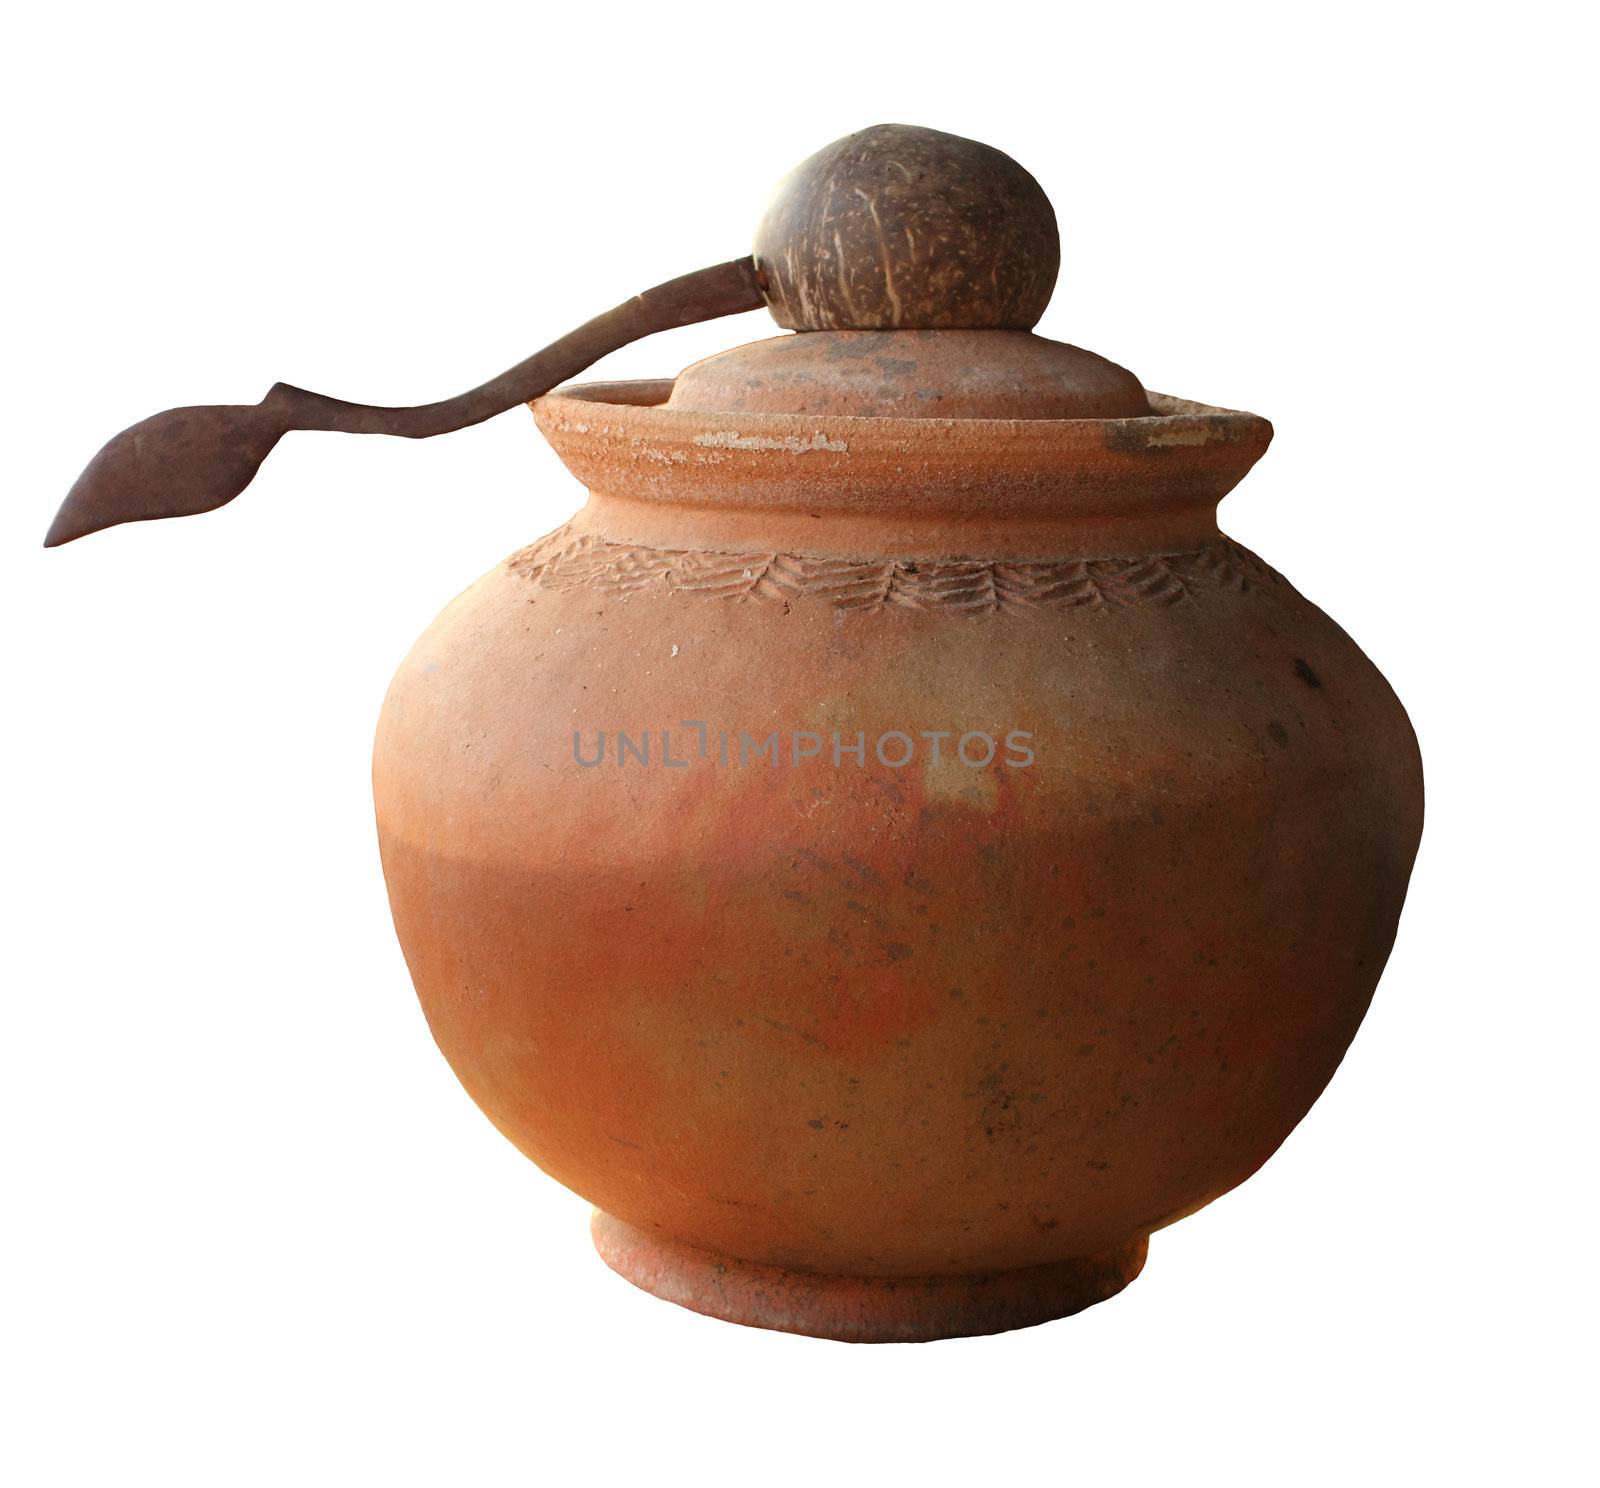 A clay pot to fill water and a deep spoon made of coconut shell